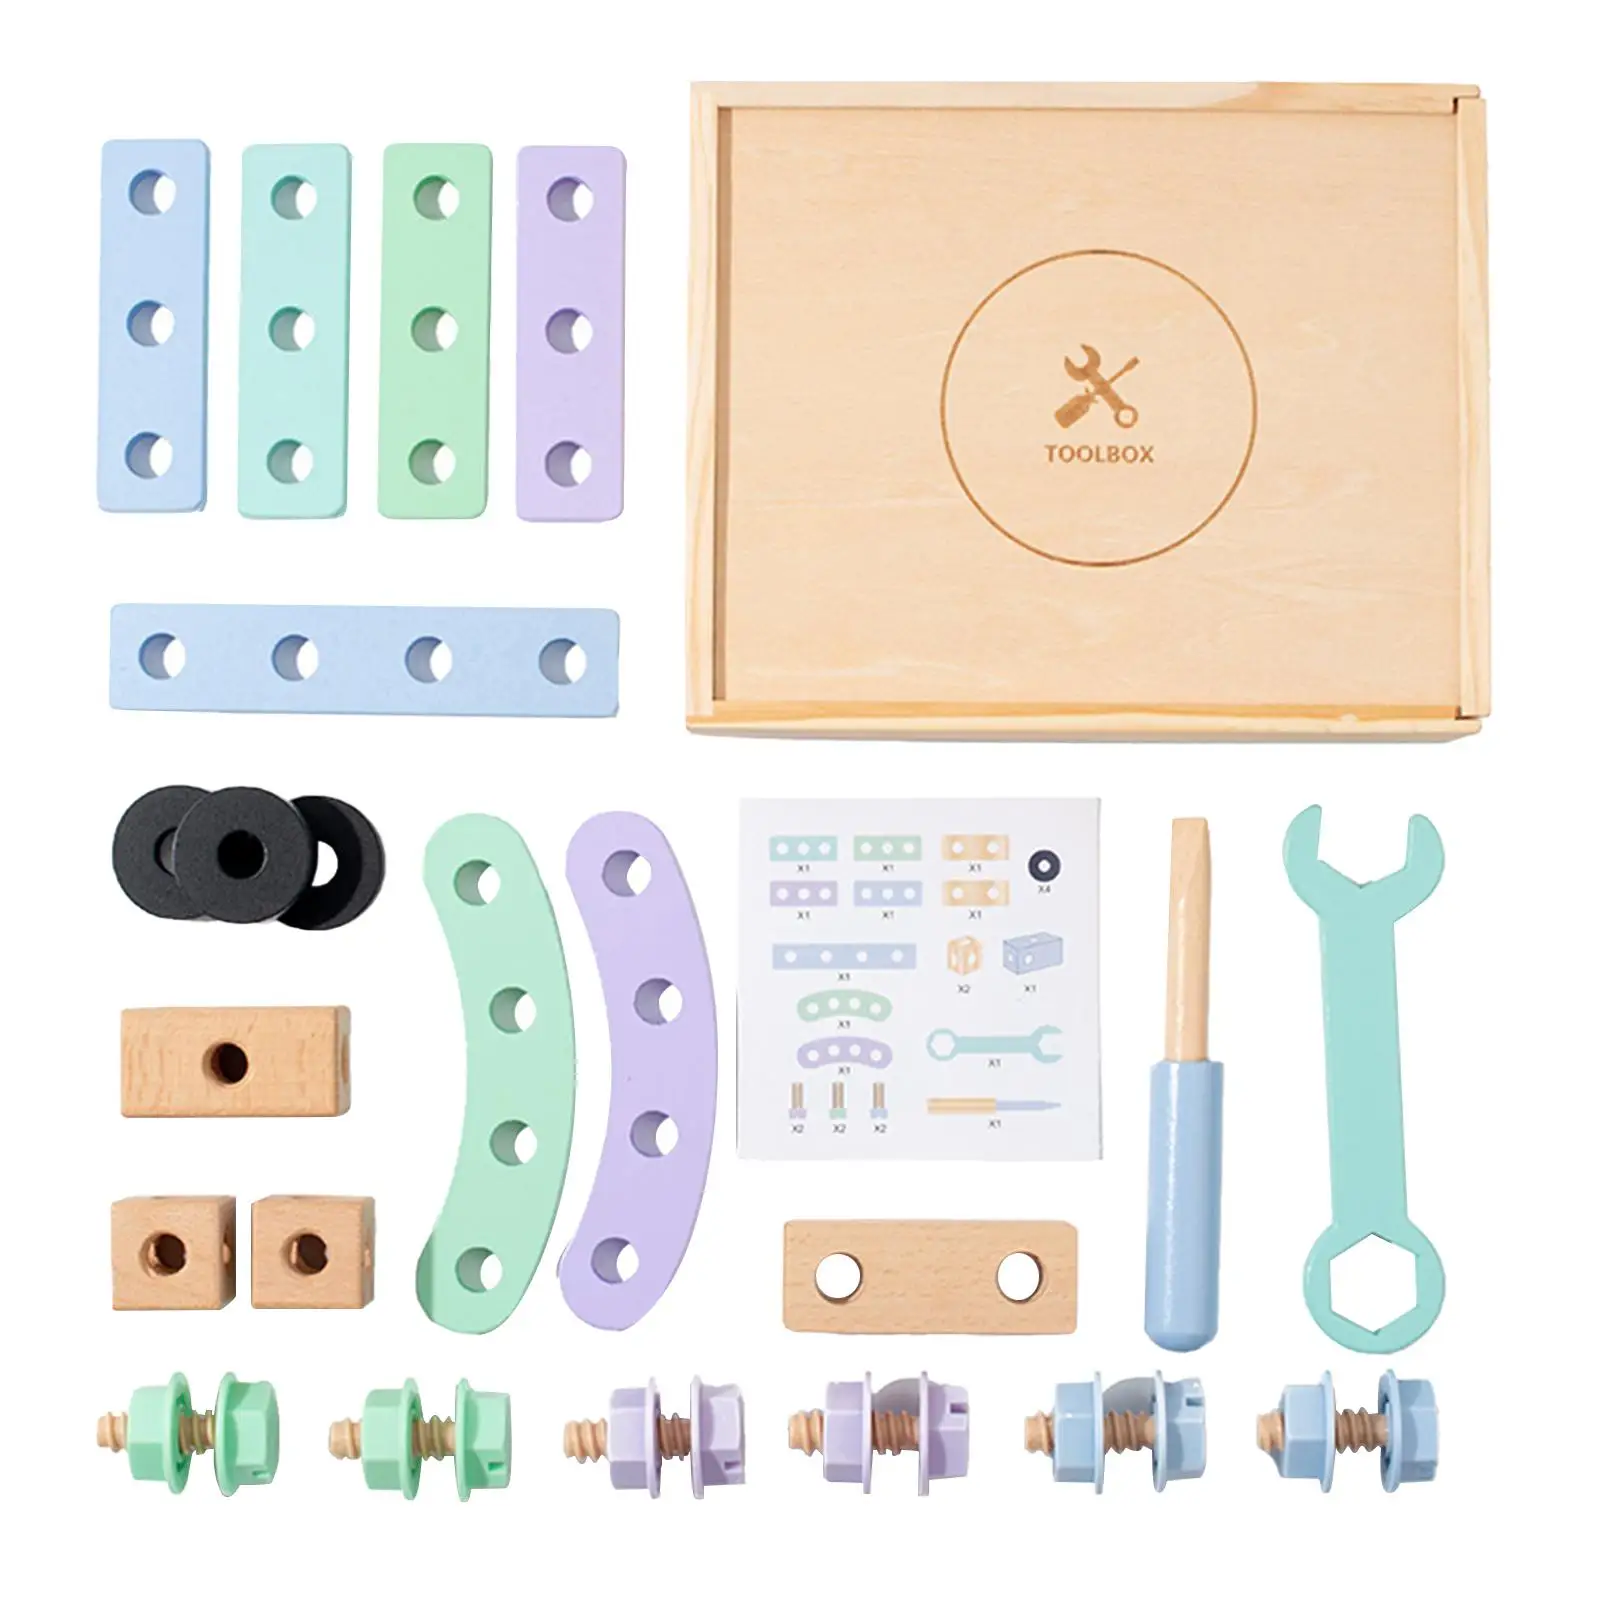 Wooden Repair Tool Box Toy Nut Screw Disassembly Birthday Gifts DIY Learning Toy for Baby Toddler Children Preschool Girls Boys